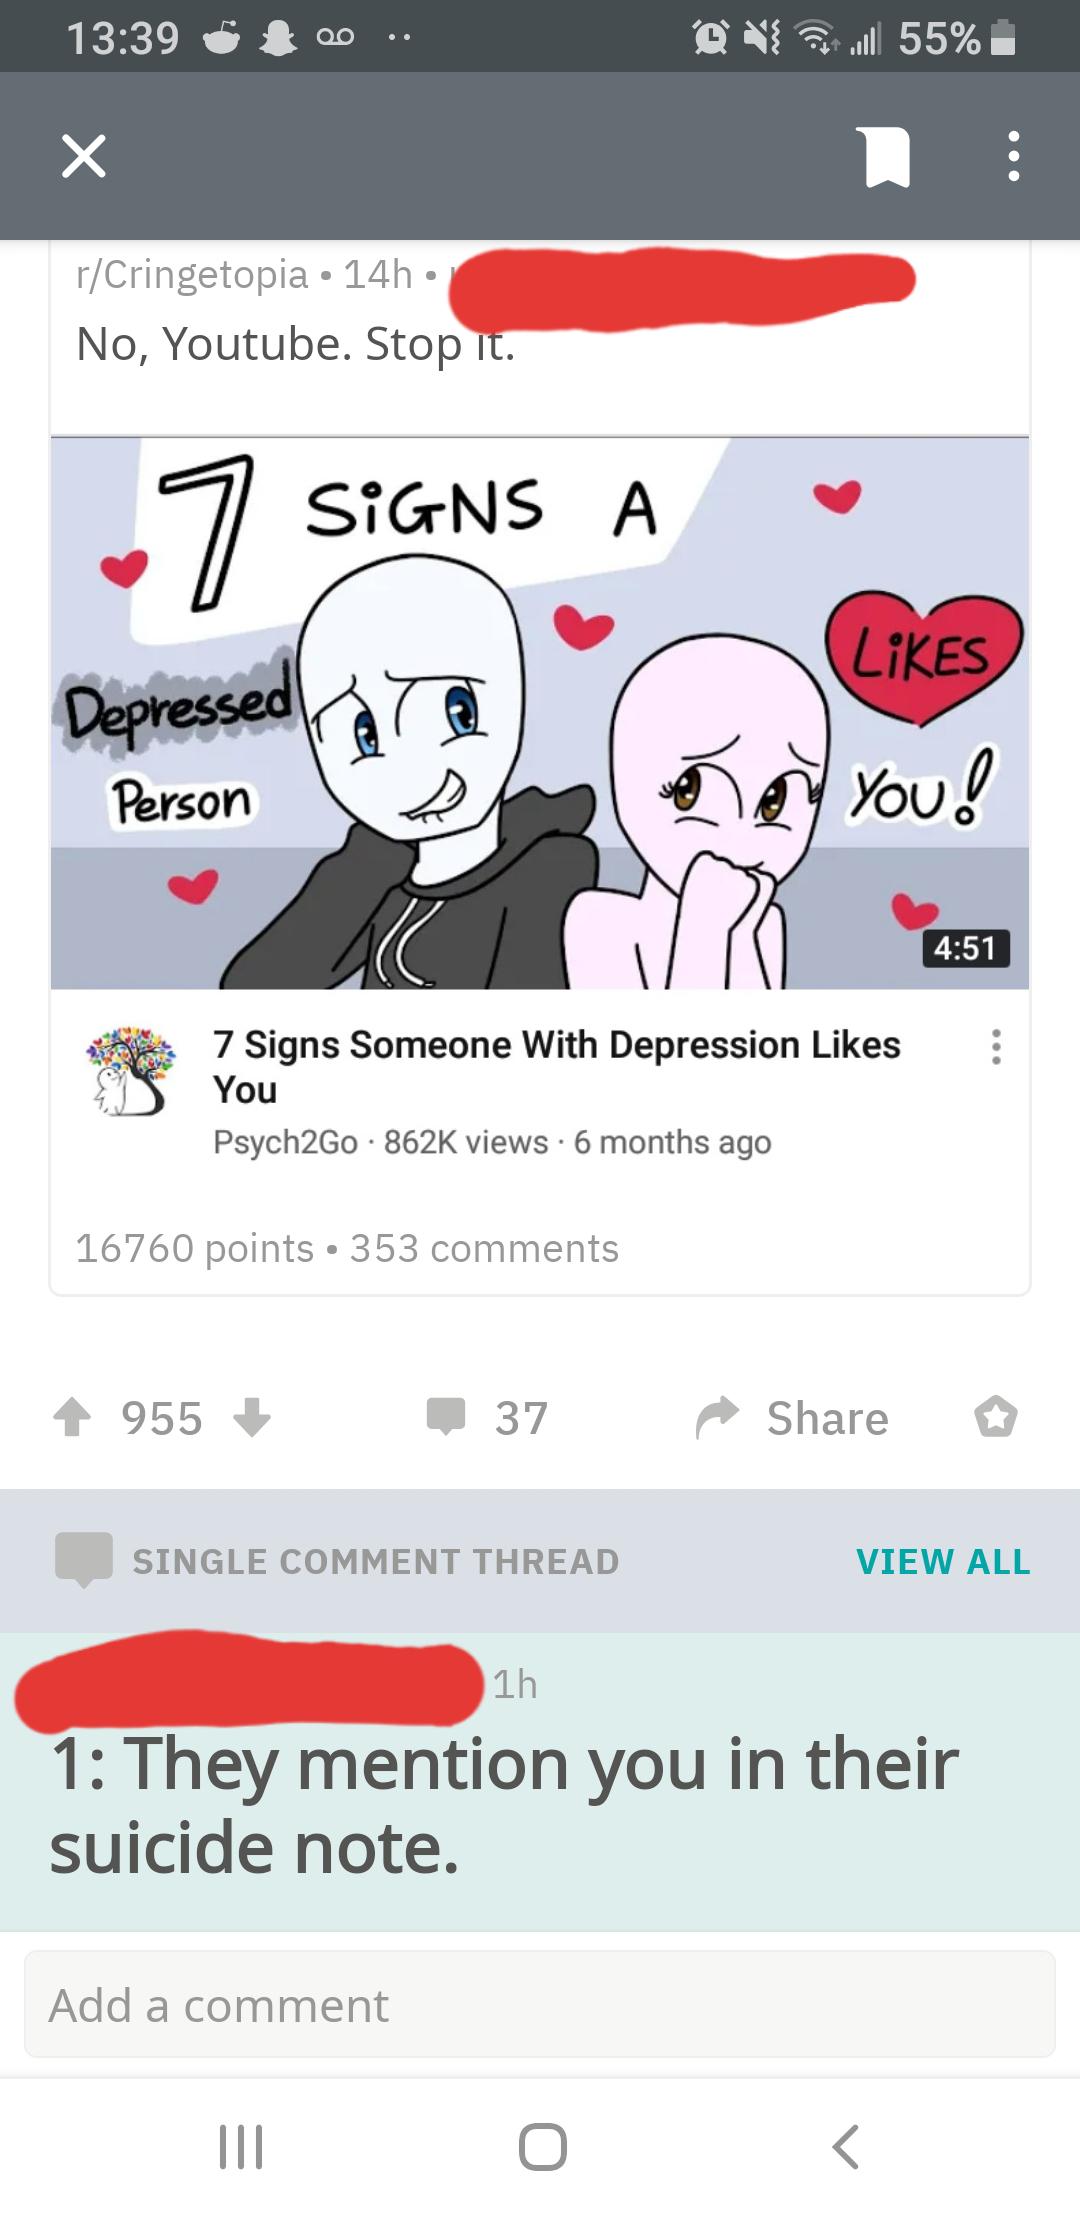 cursed comment - cartoon - 5 # 00 .. V ull 55% rCringetopia 14h No, Youtube. Stop It. Signs A Depressedere Person of you! 7 Signs Someone With Depression You Psych2Go views 6 months ago 16760 points 353 955 37 o Single Comment Thread View All 1 They menti